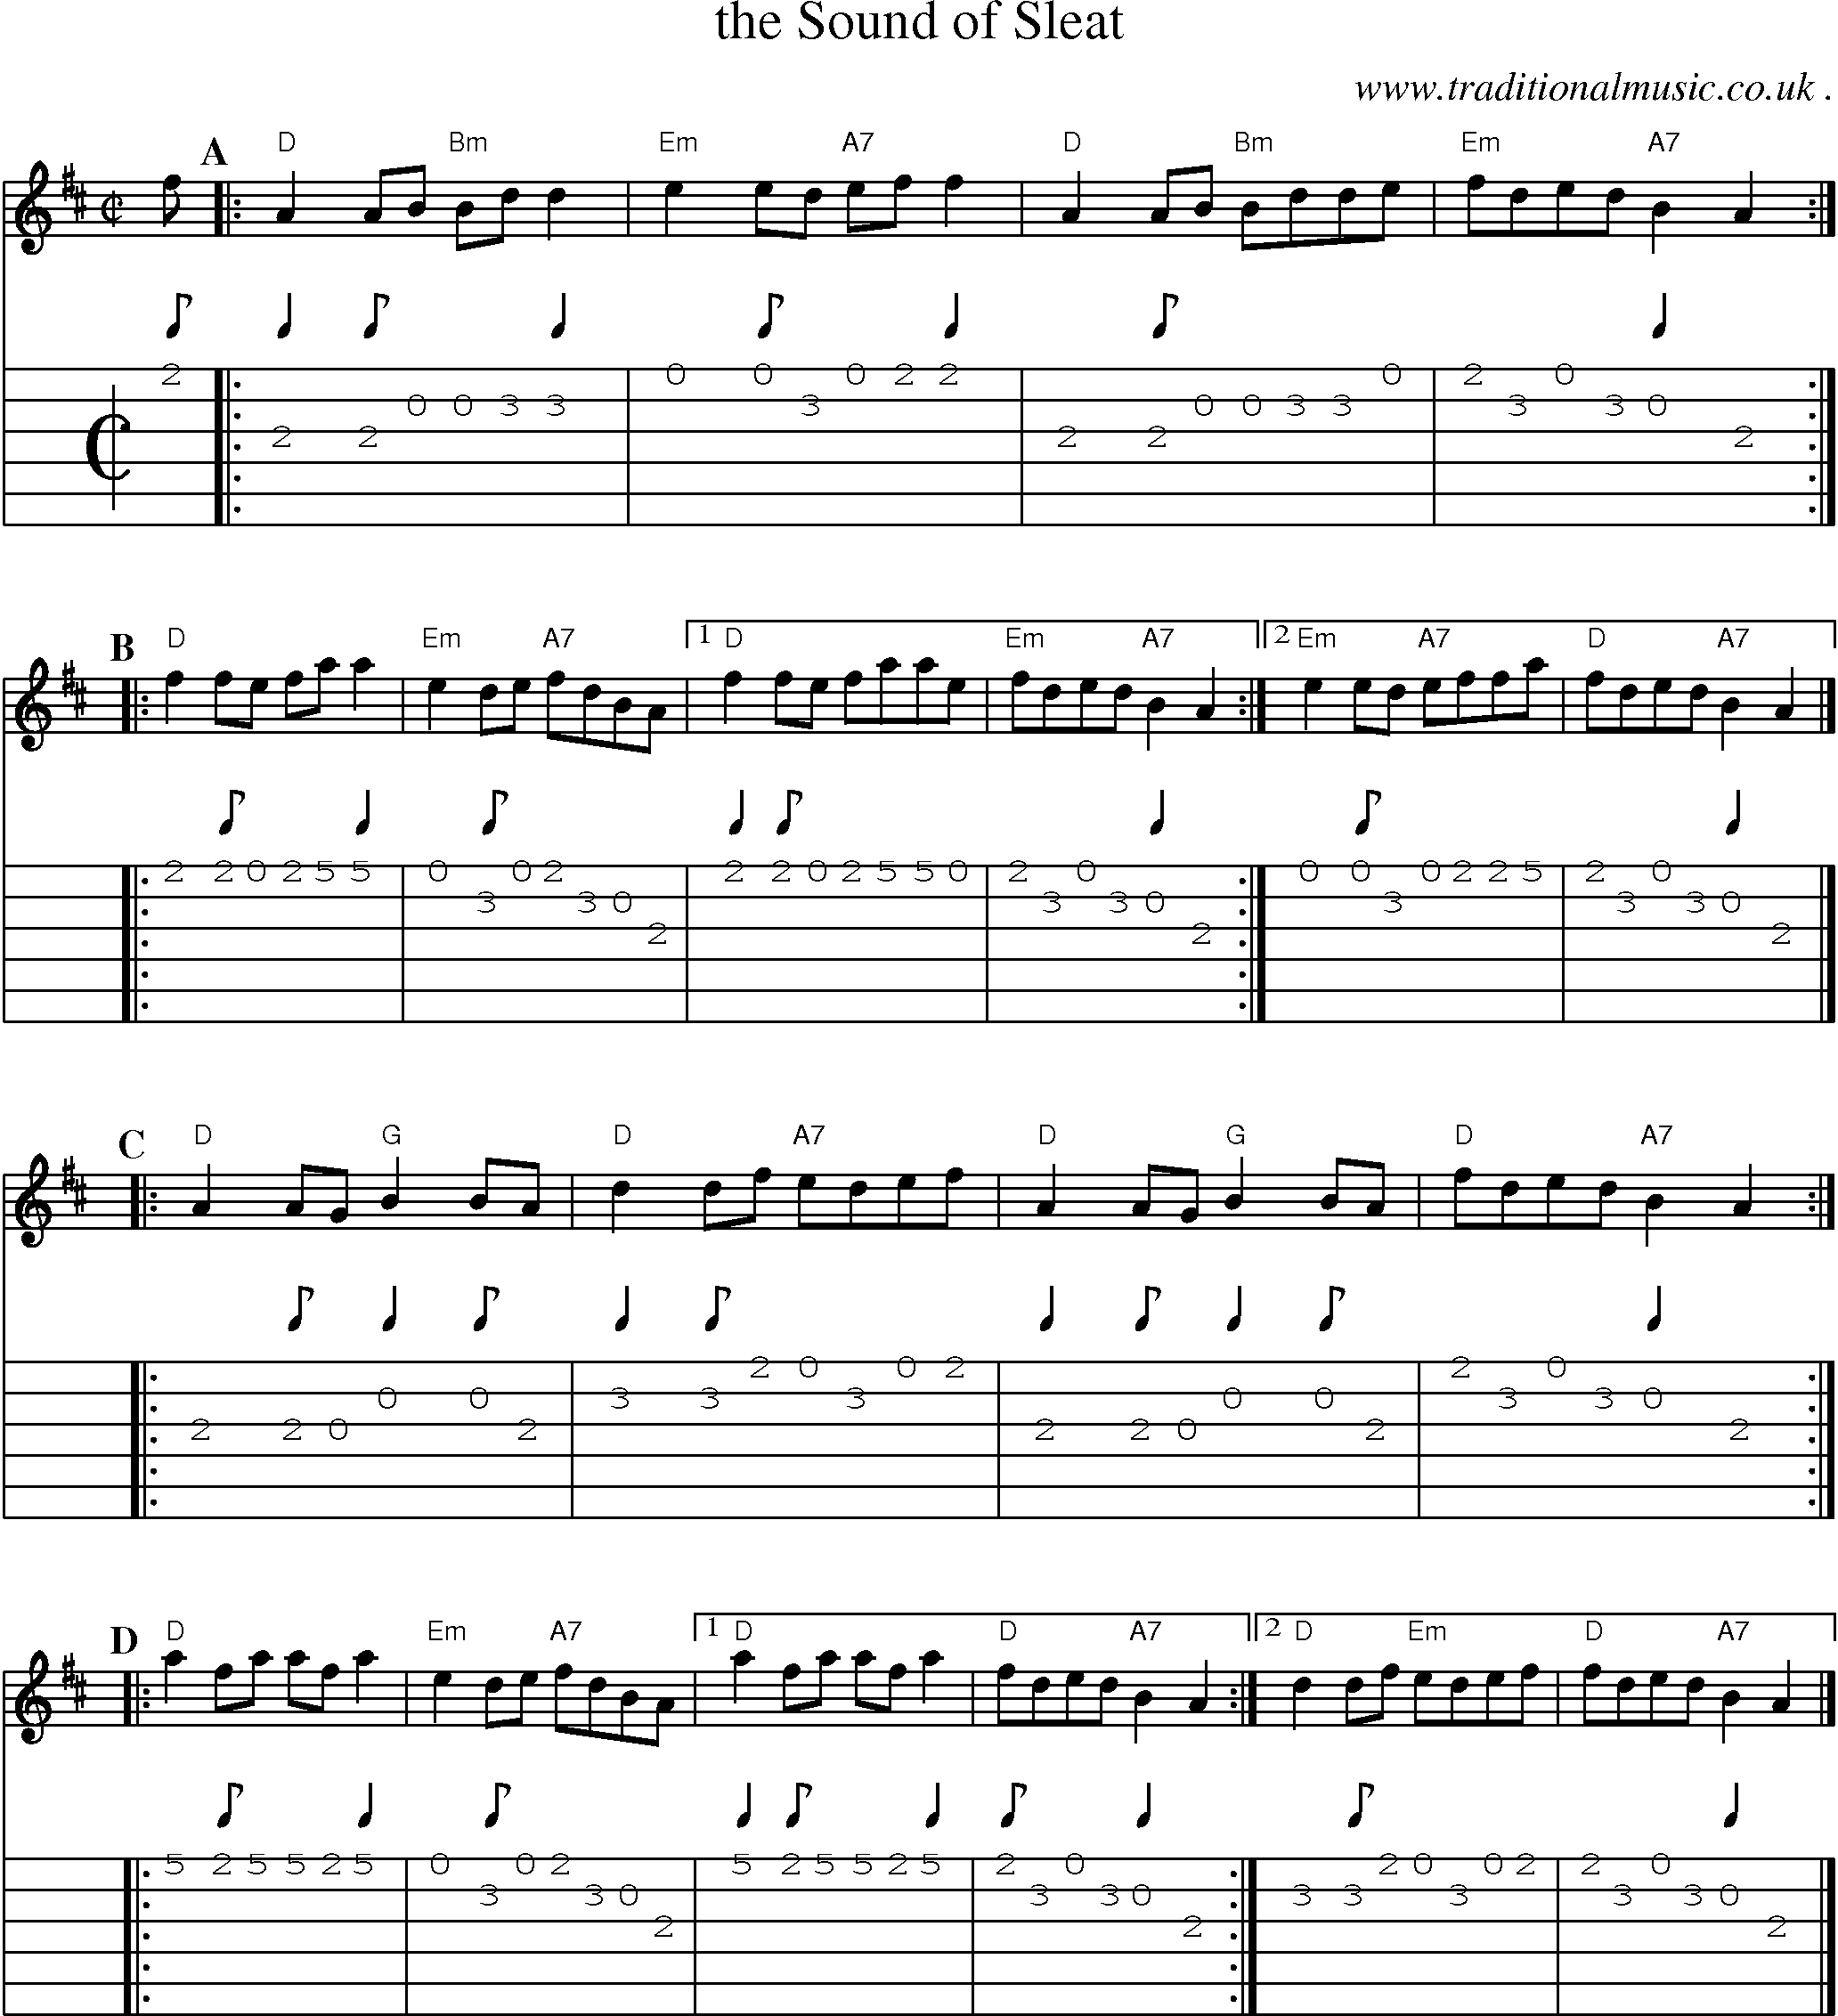 Sheet-music  score, Chords and Guitar Tabs for The Sound Of Sleat